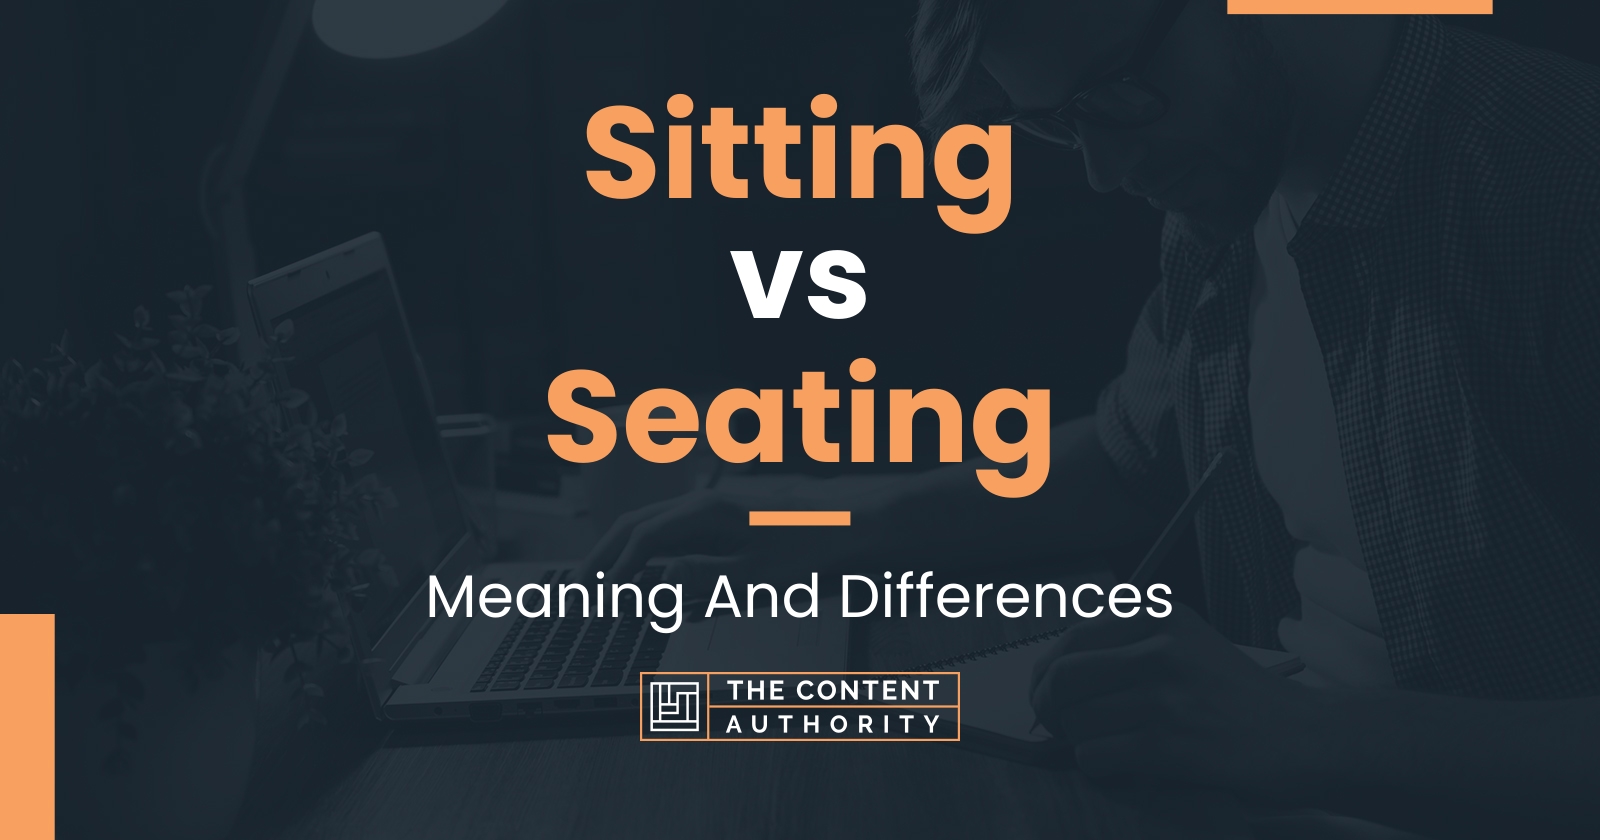 Sitting vs Seating Meaning And Differences